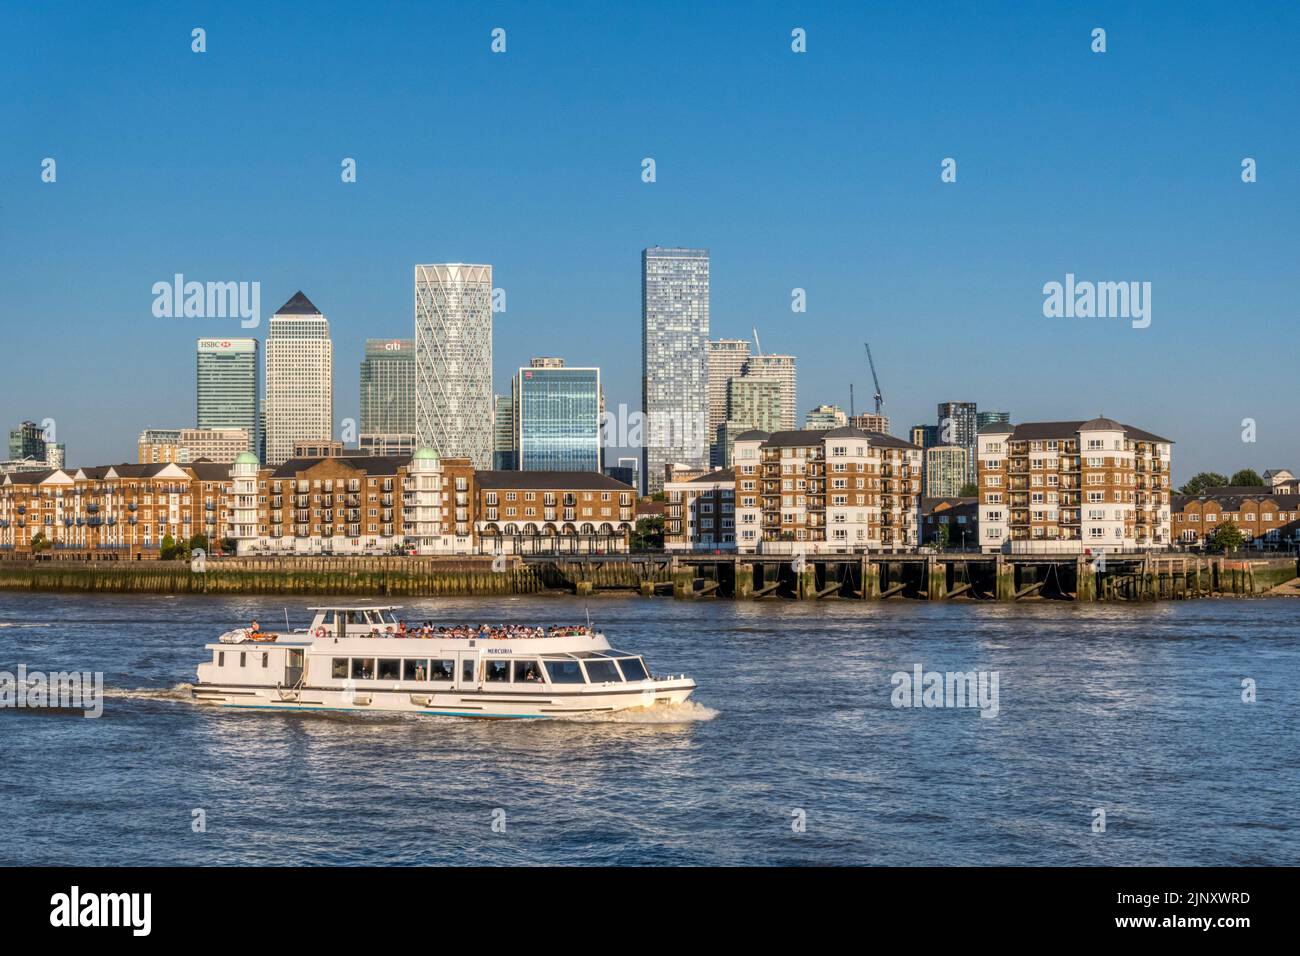 Sightseeing boat Mercuria passing the Rotherhithe Peninsula with Canary Wharf & the Isle of Dogs in the background. Stock Photo